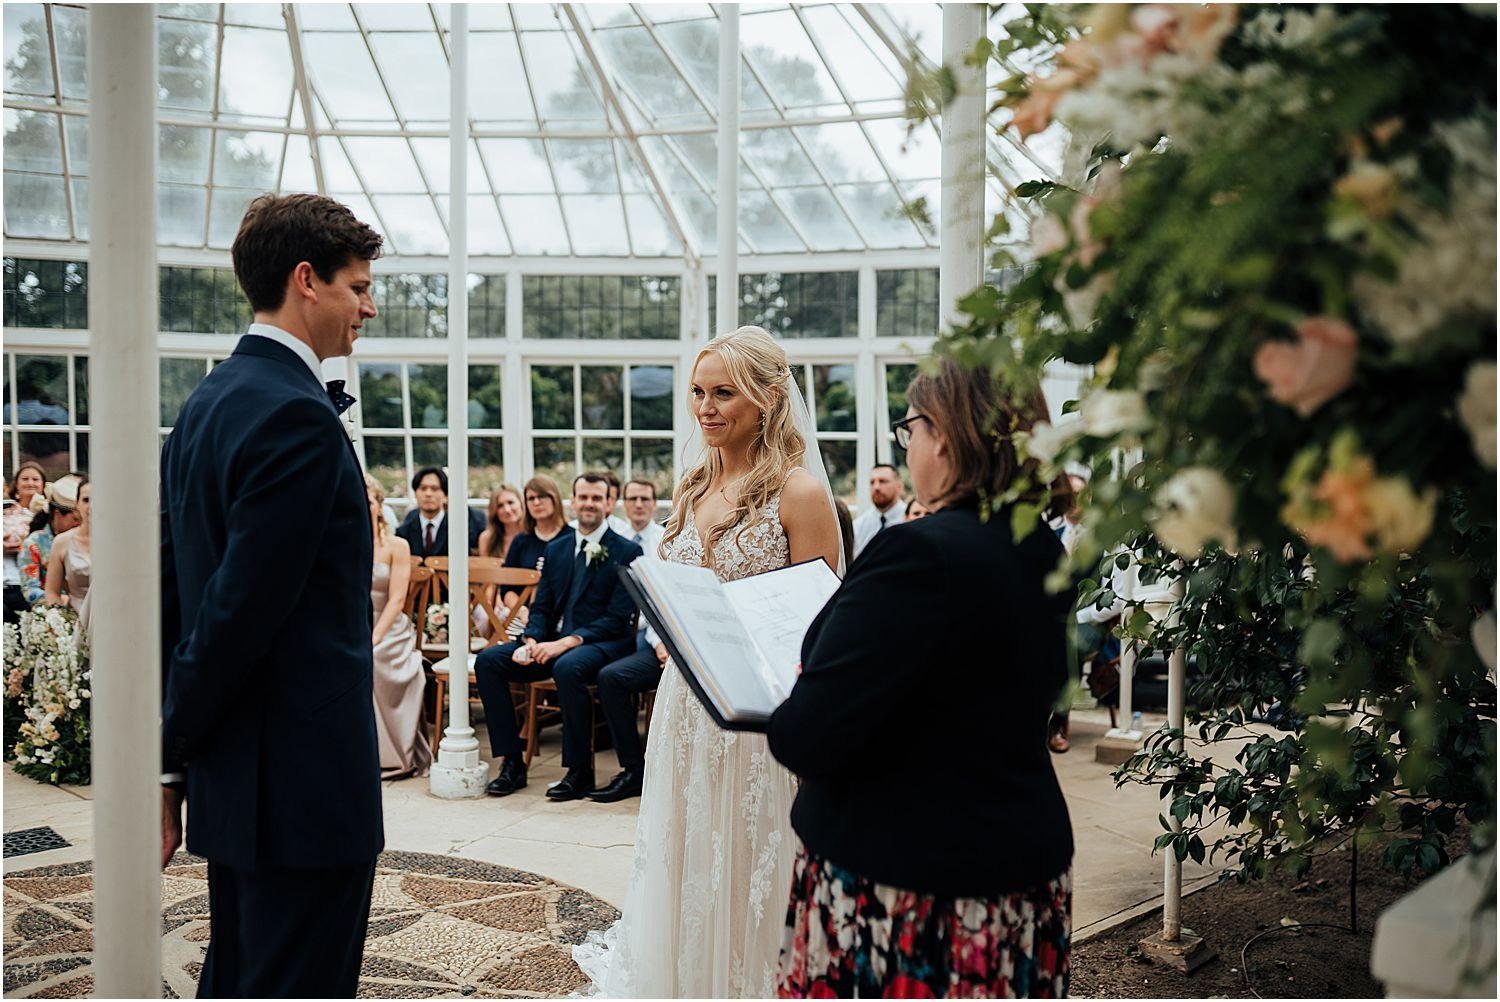 Chiswick House and Gardens wedding ceremony